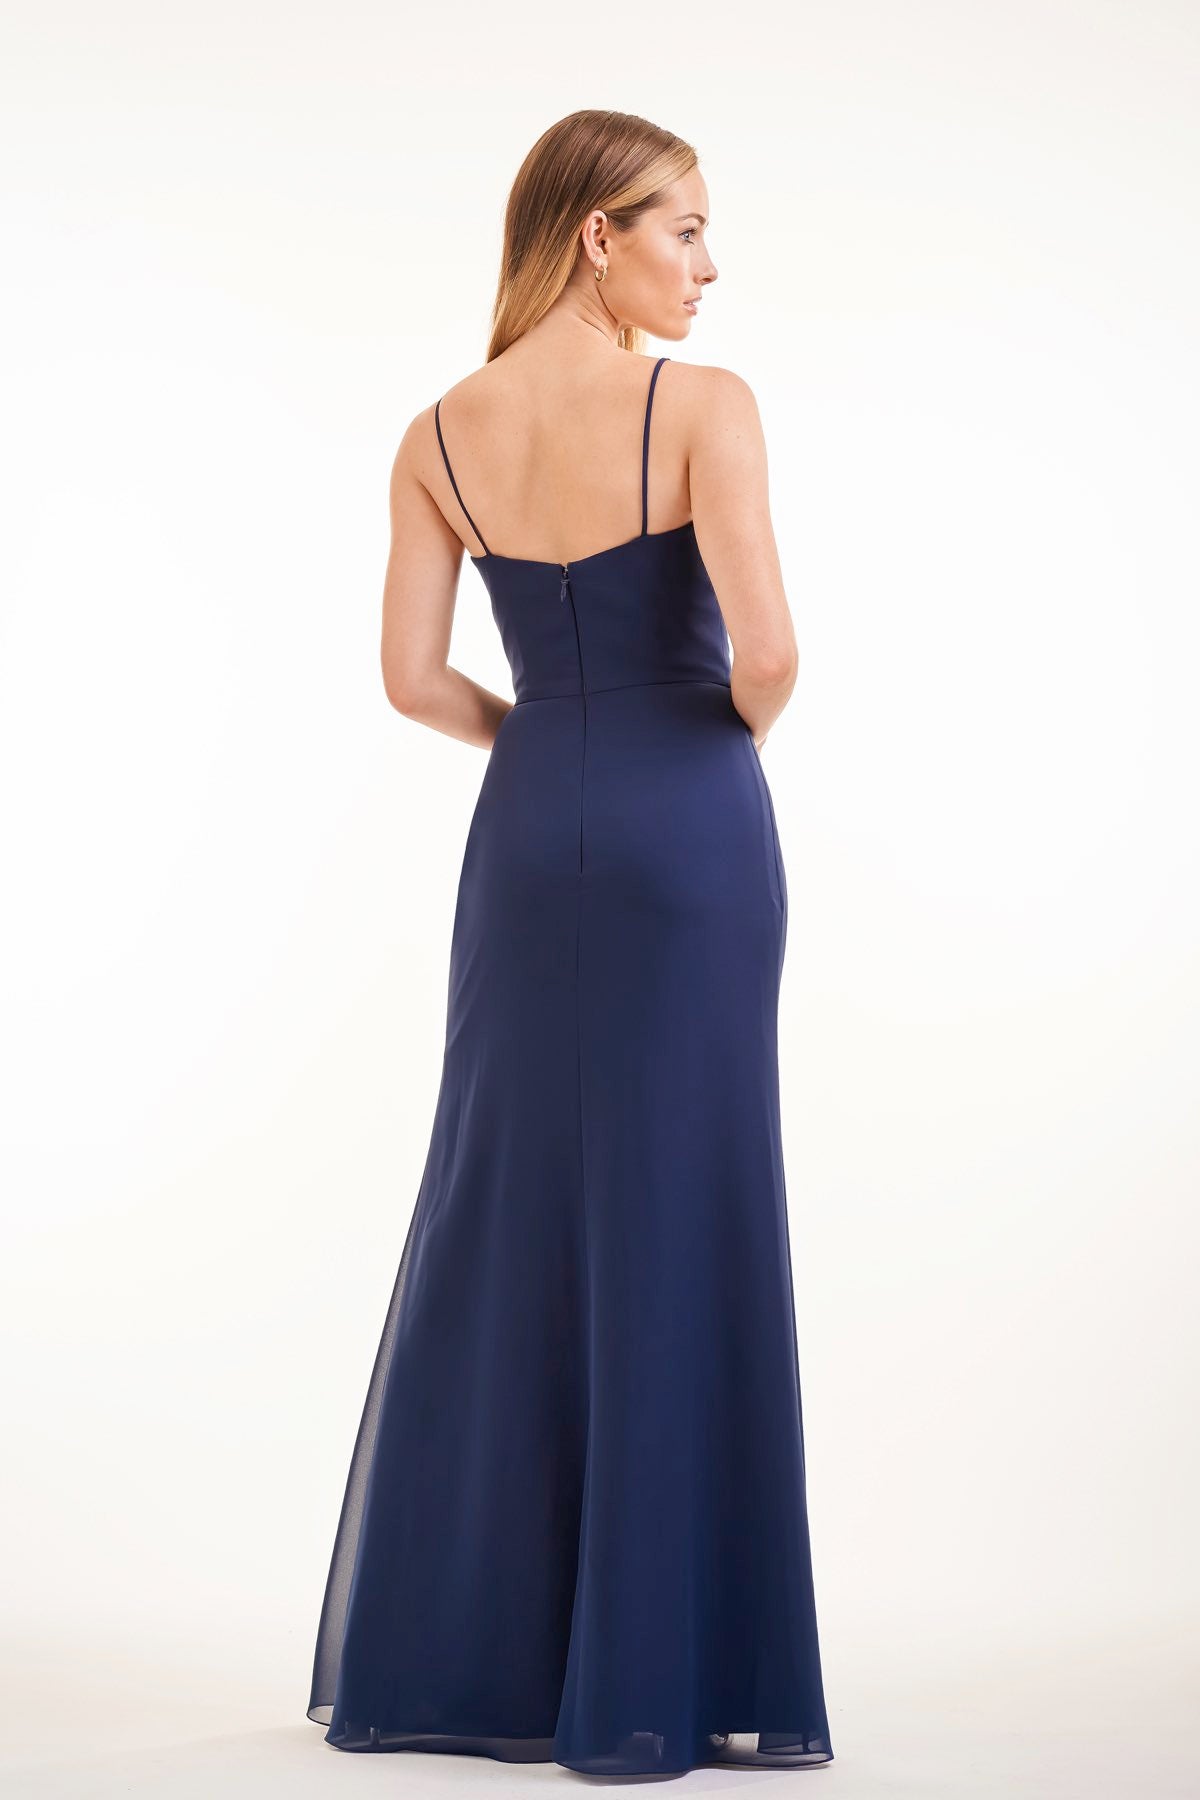 Simple Charlotte Chiffon Long Fit-and-Flare Bridesmaid Dress | Available Long or Short - Several Colors - Sizes 00-34 | In Store ONLY